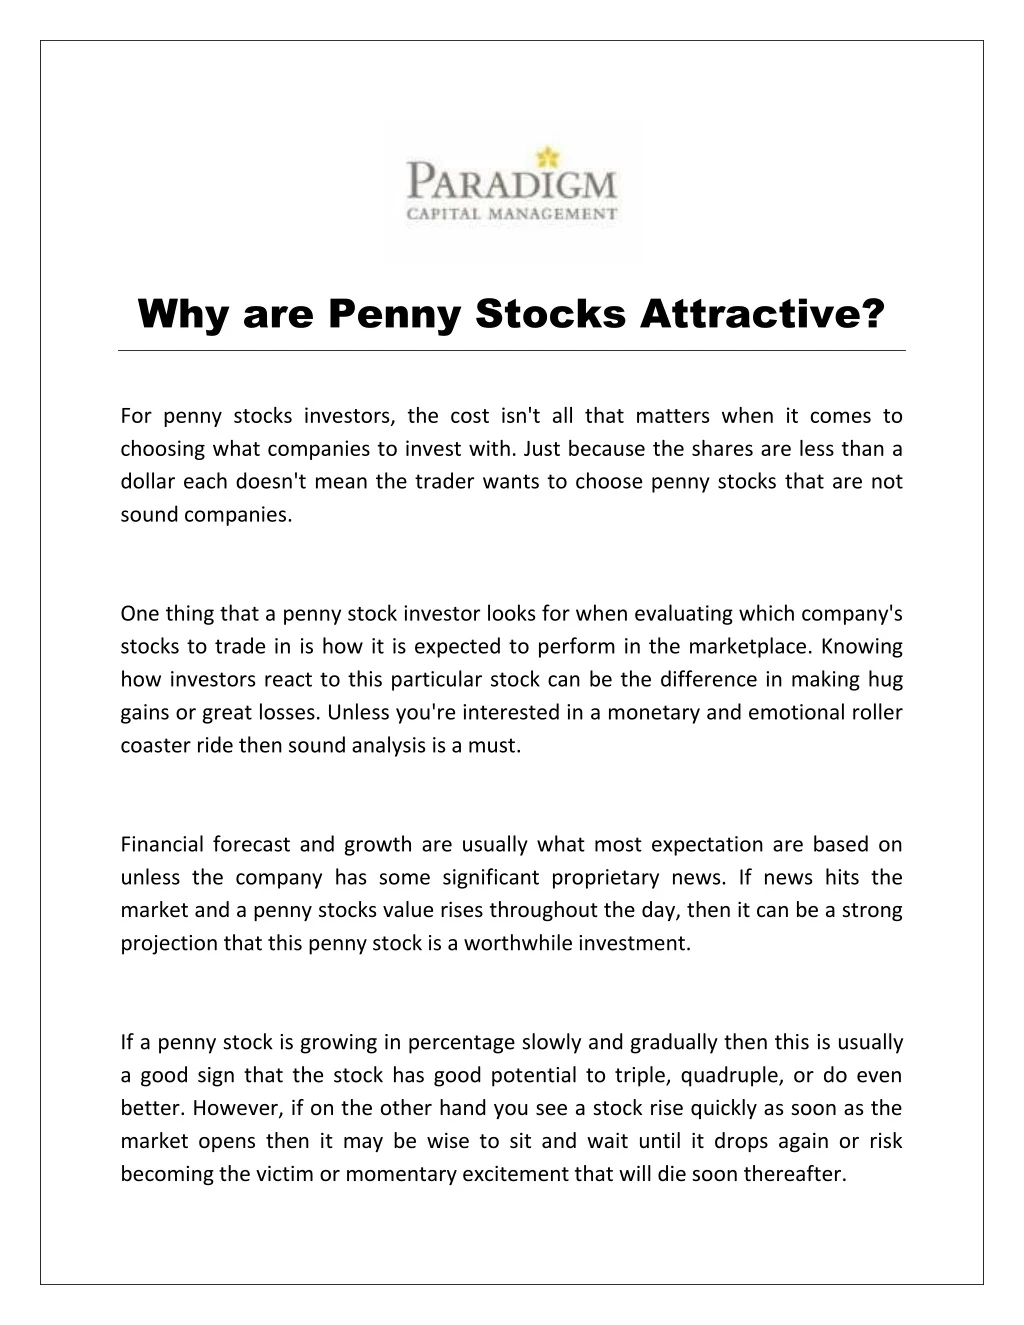 why are penny stocks attractive